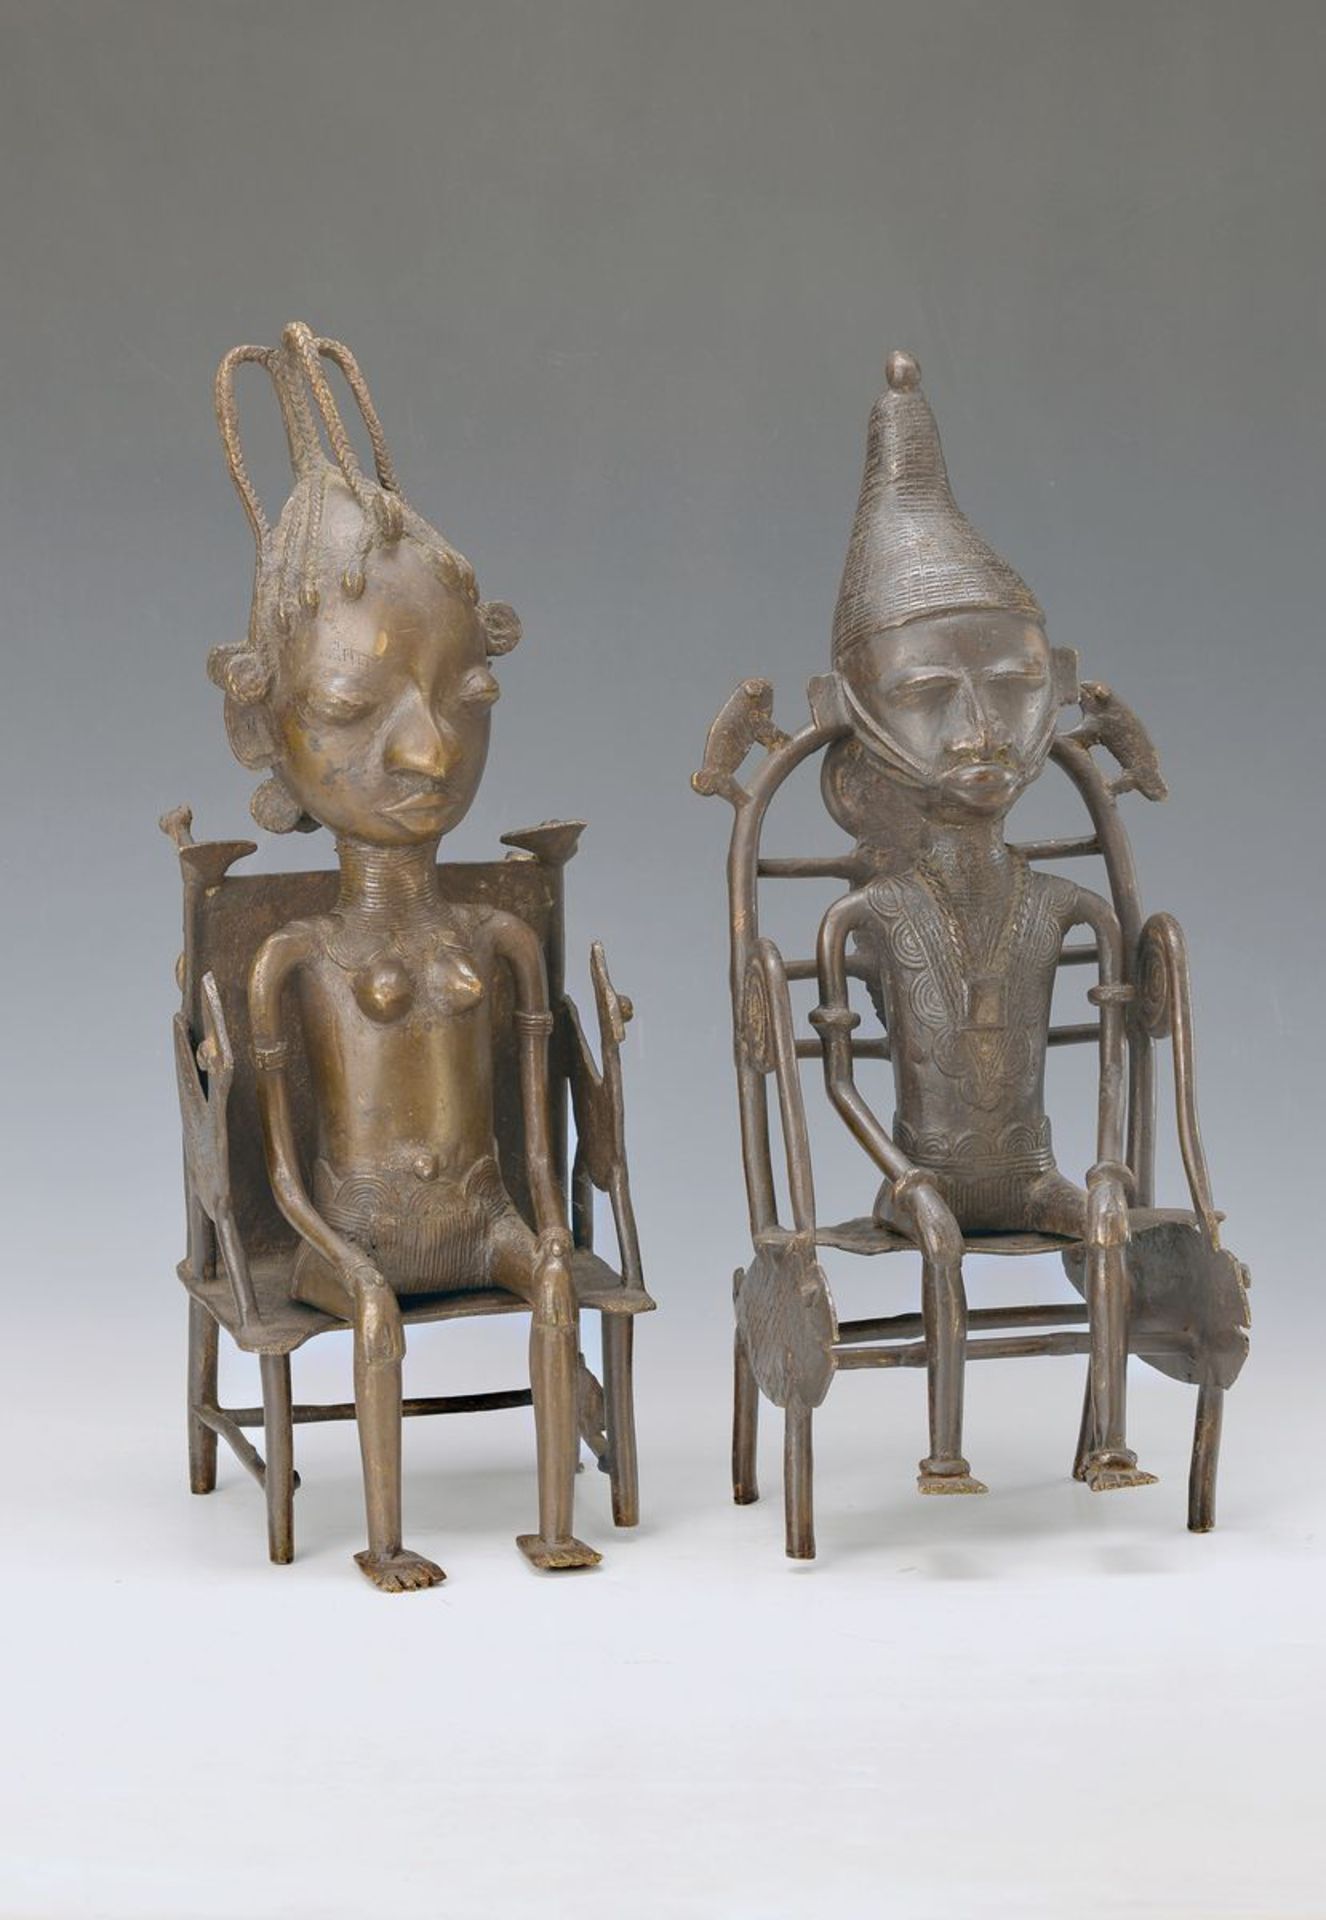 pair of figurines, Benin, 1950s/1960s, Bronze,female and male figure on throne, probably Chieftain